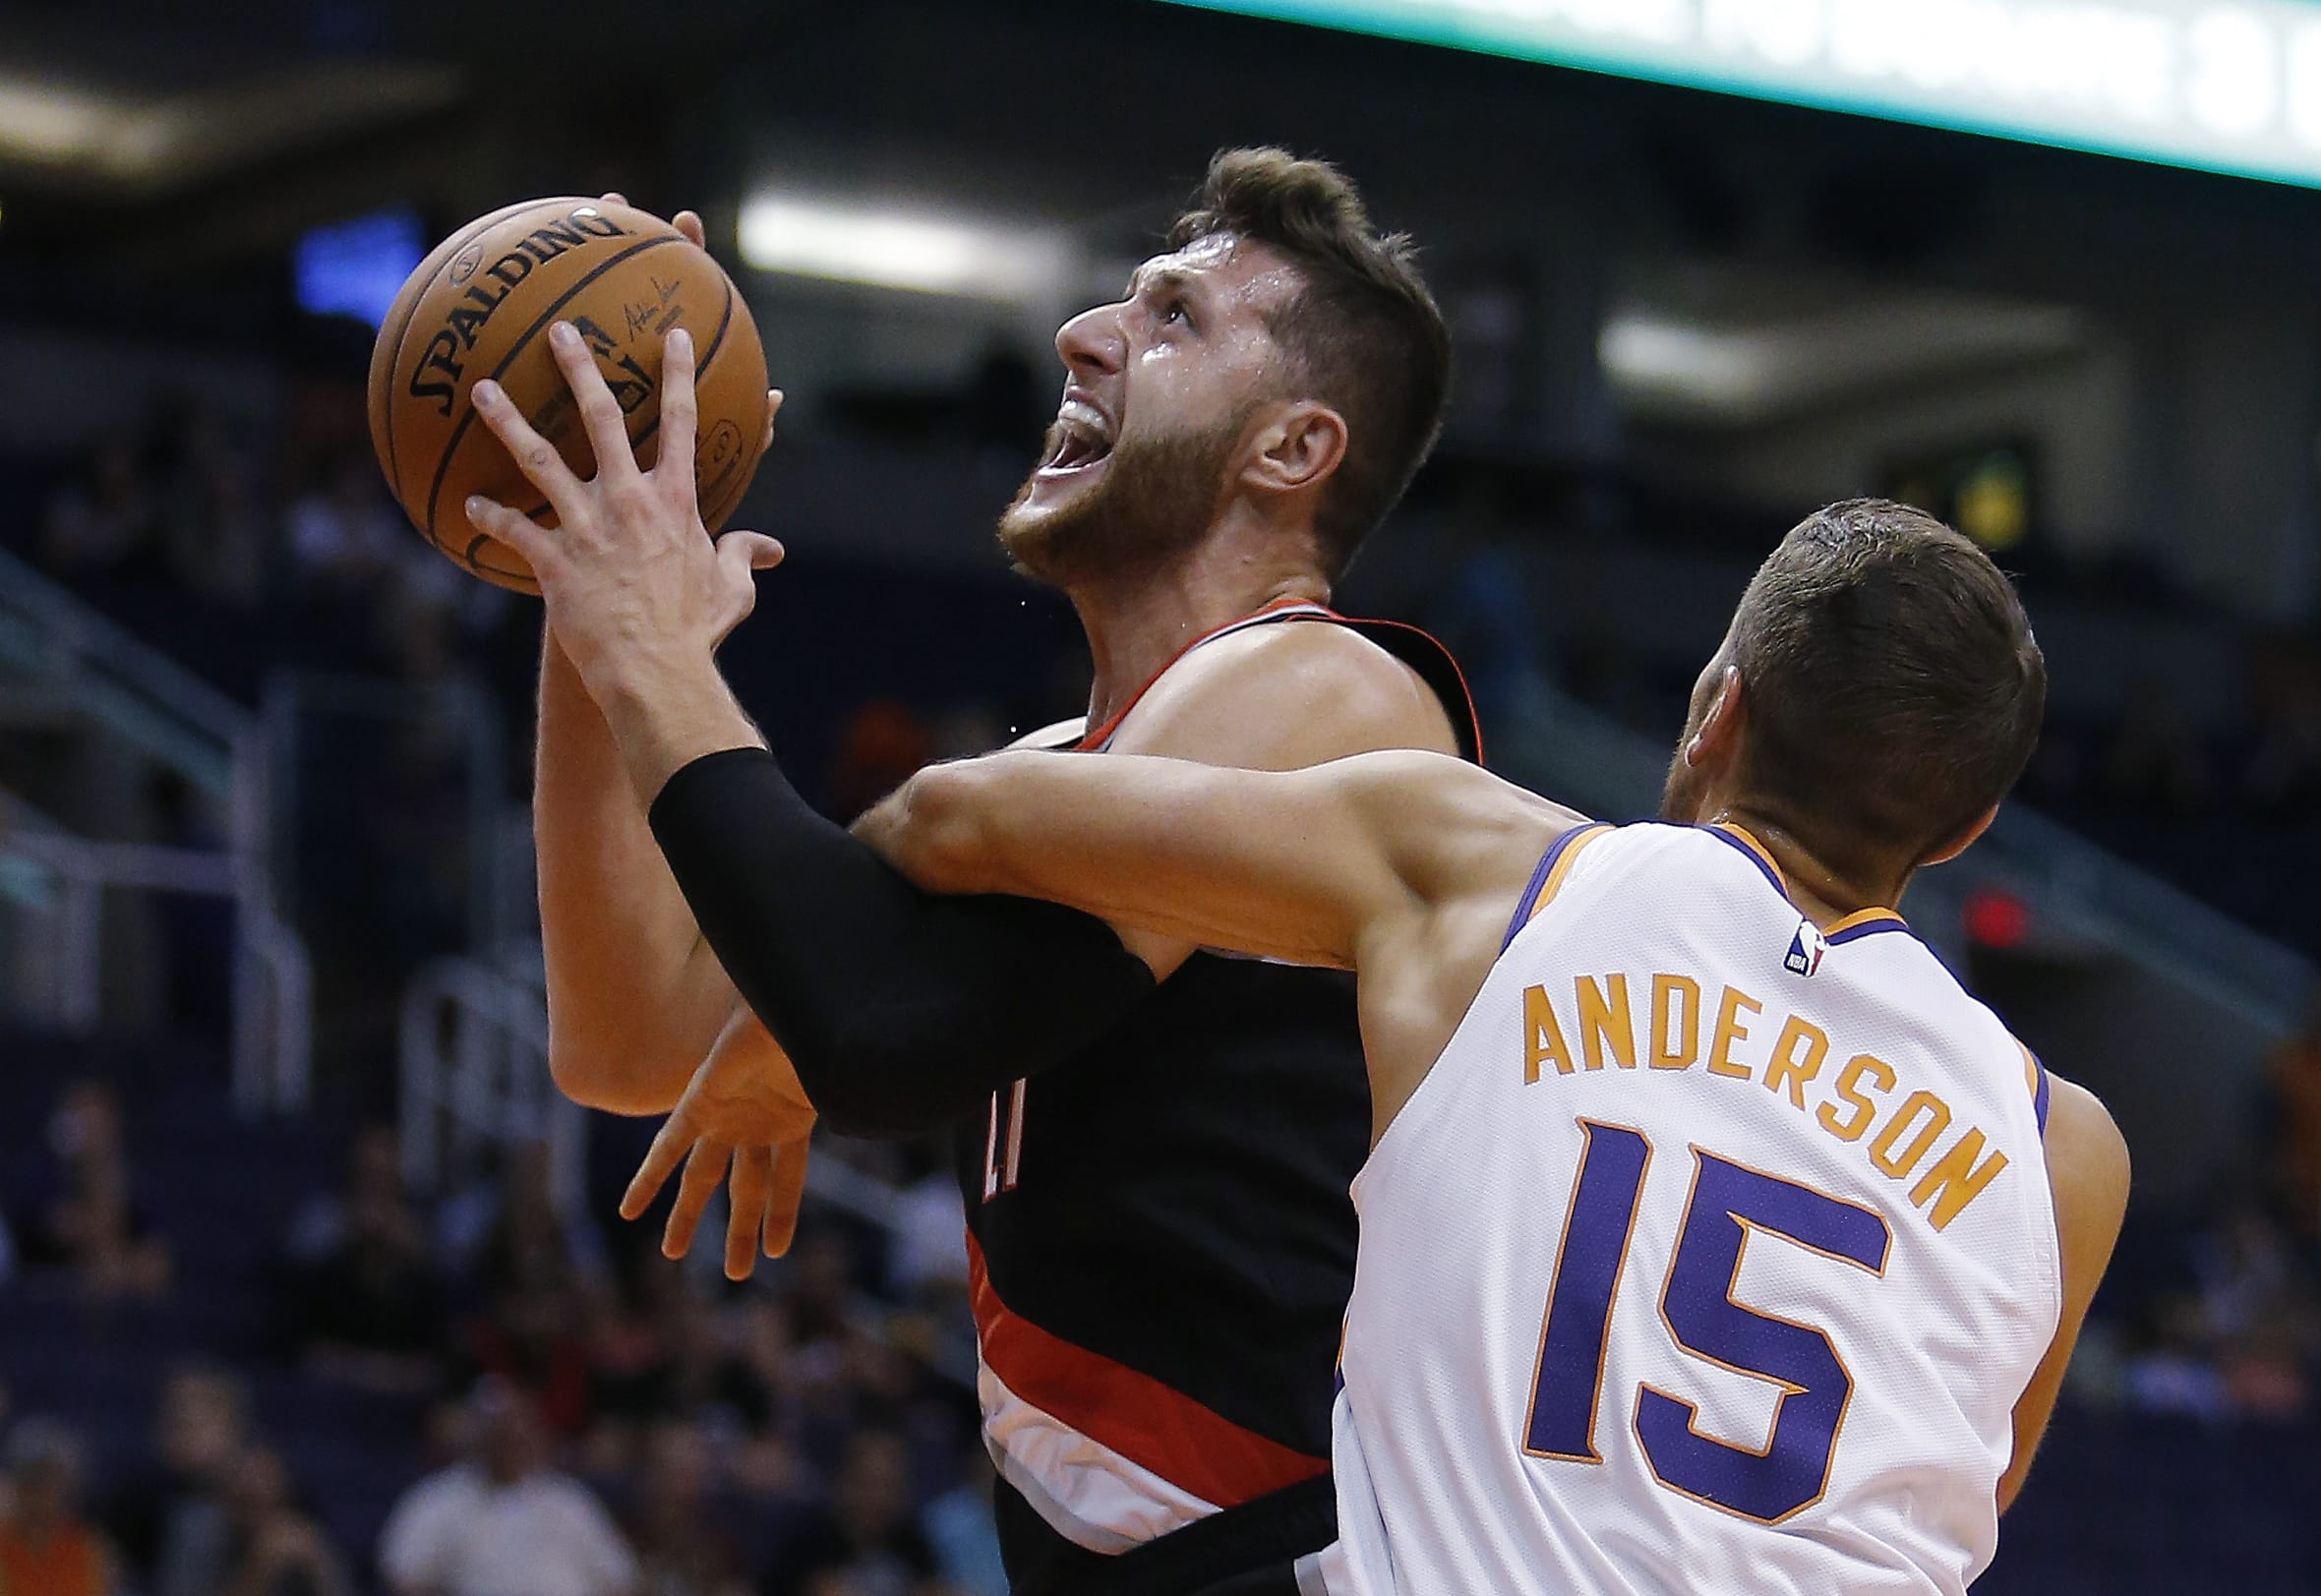 Portland Trail Blazers center Jusuf Nurkic is fouled by Phoenix Suns forward Ryan Anderson (15) during the first half of an NBA preseason basketball game Friday, Oct. 5, 2018, in Phoenix.